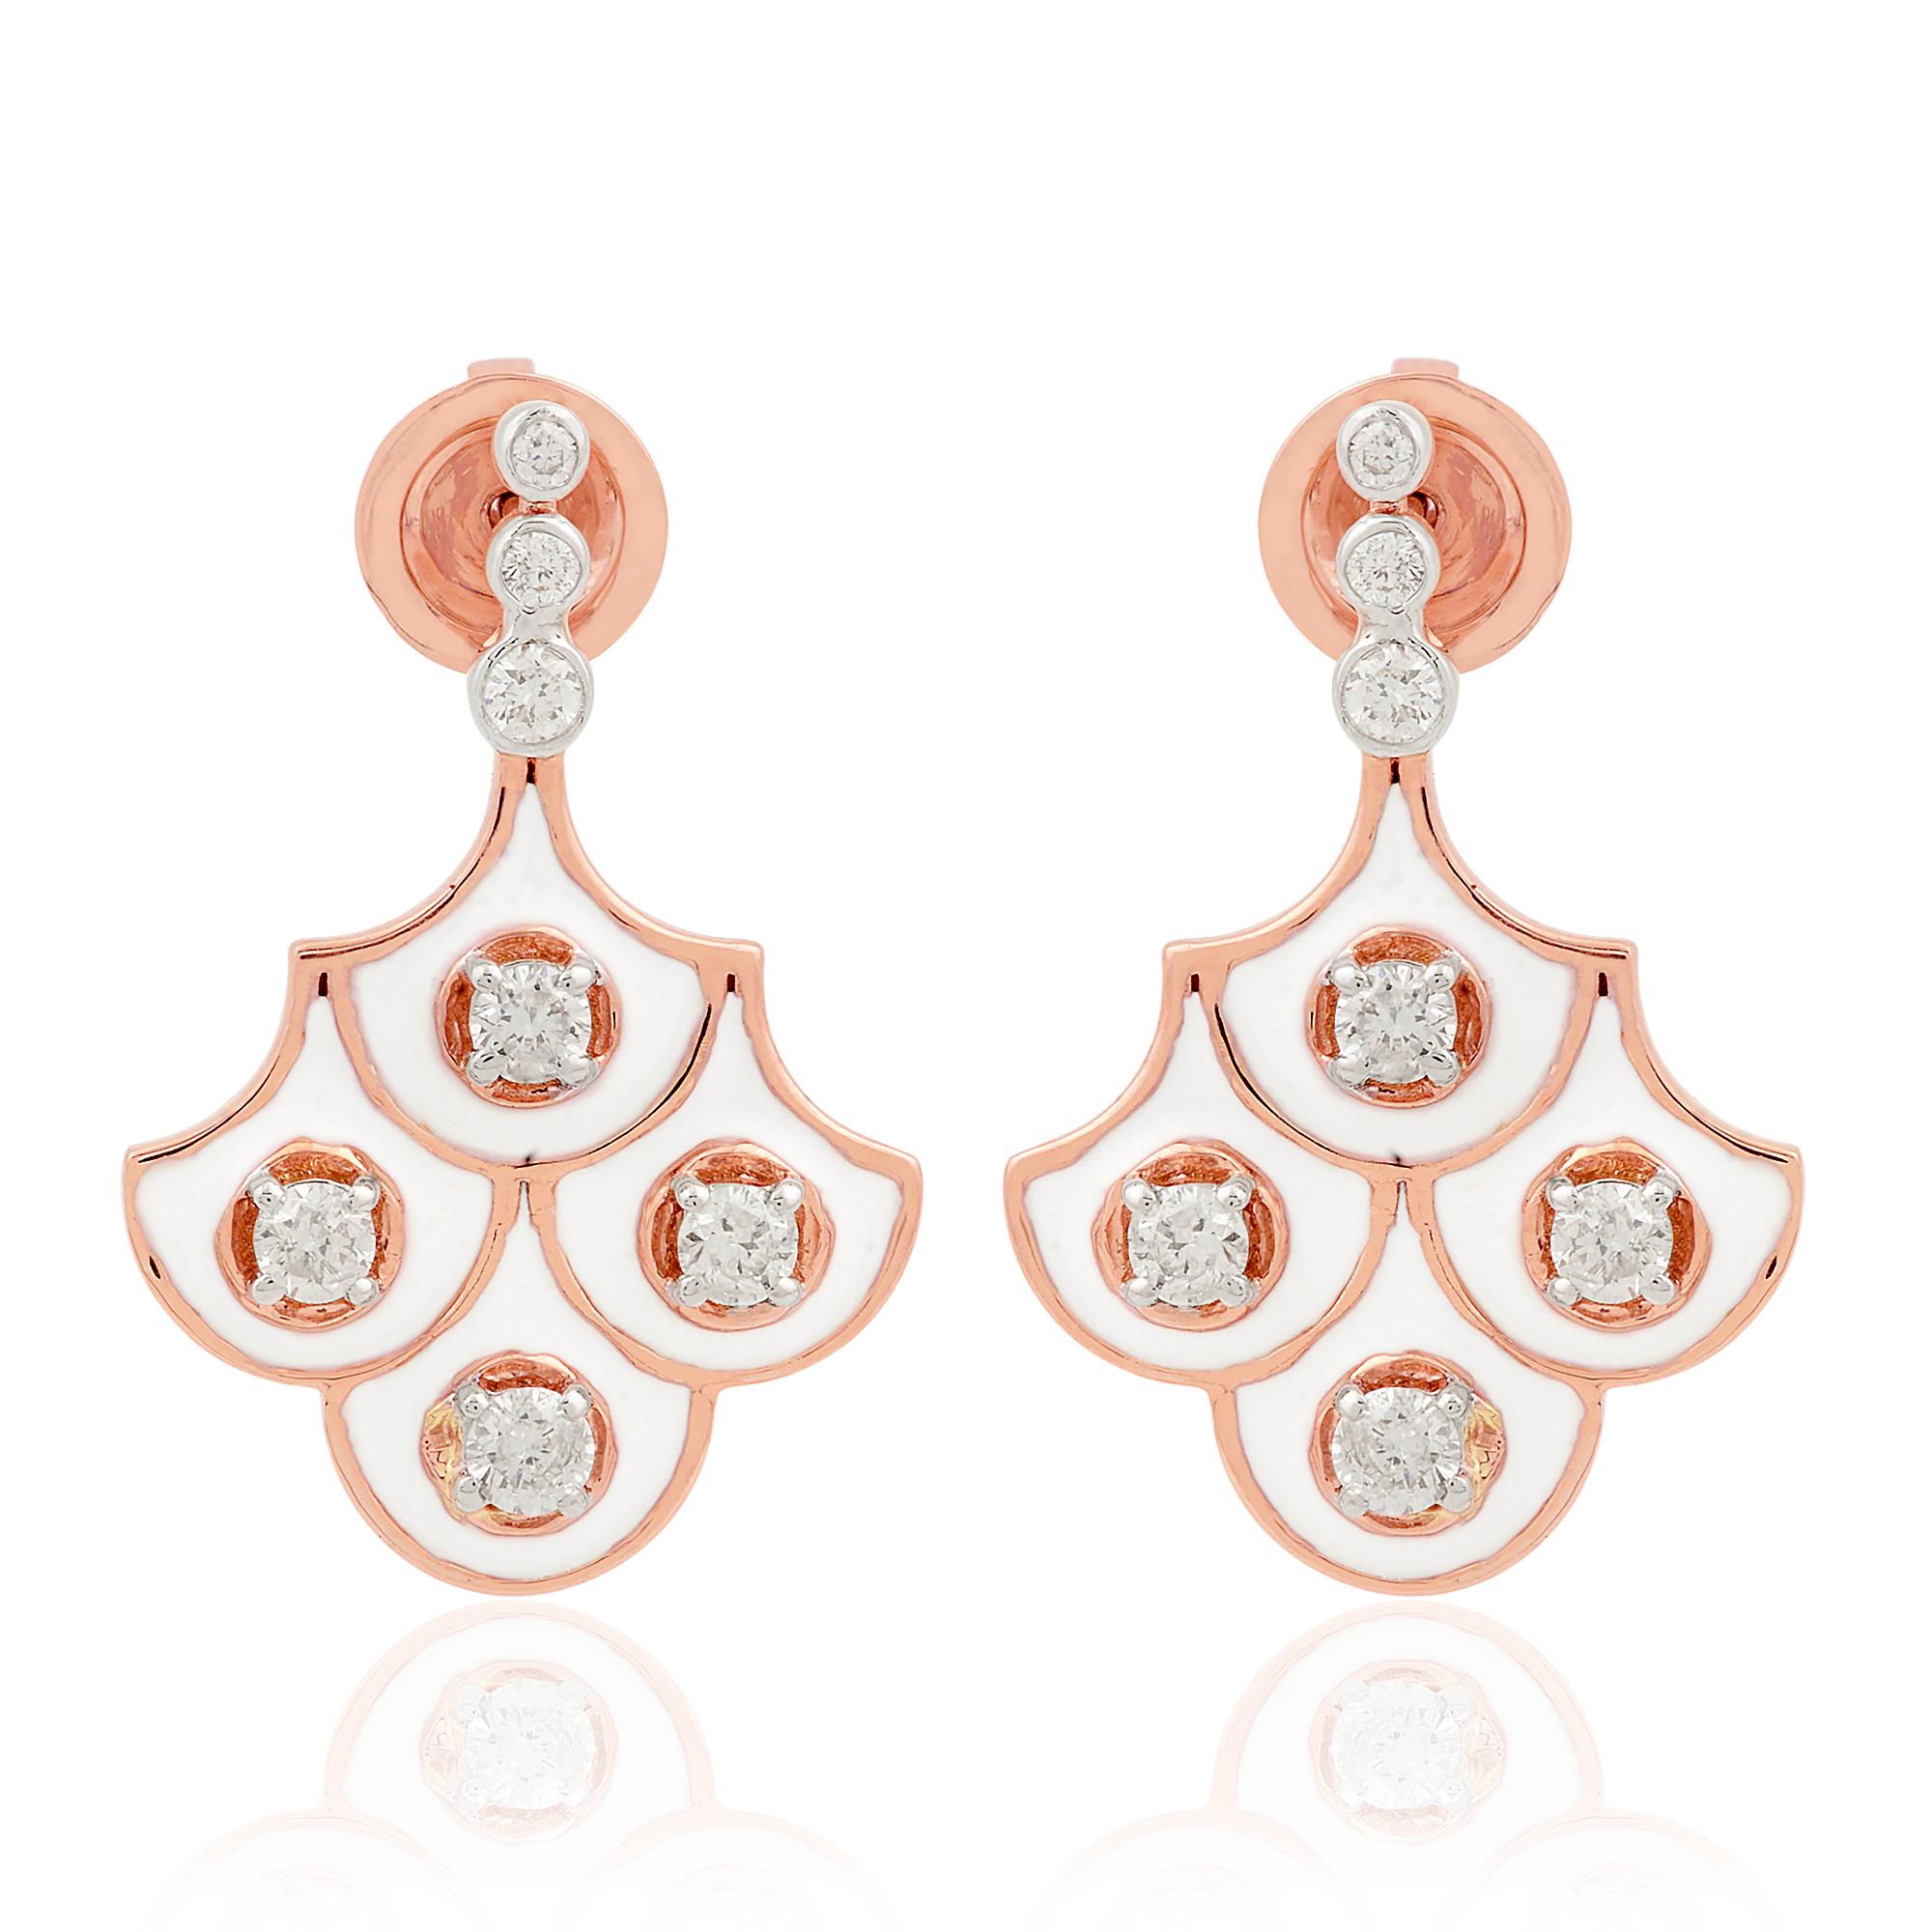 Item Code :- SEE-1670A
Gross Wt. :- 7.07 gm
18k Solid Rose Gold Wt. :- 6.89 gm
Natural Diamond Wt. :- 0.88 Ct. ( AVERAGE DIAMOND CLARITY SI1-SI2 & COLOR H-I )
Earrings Size :- 24 mm approx.

✦ Sizing
.....................
We can adjust most items to